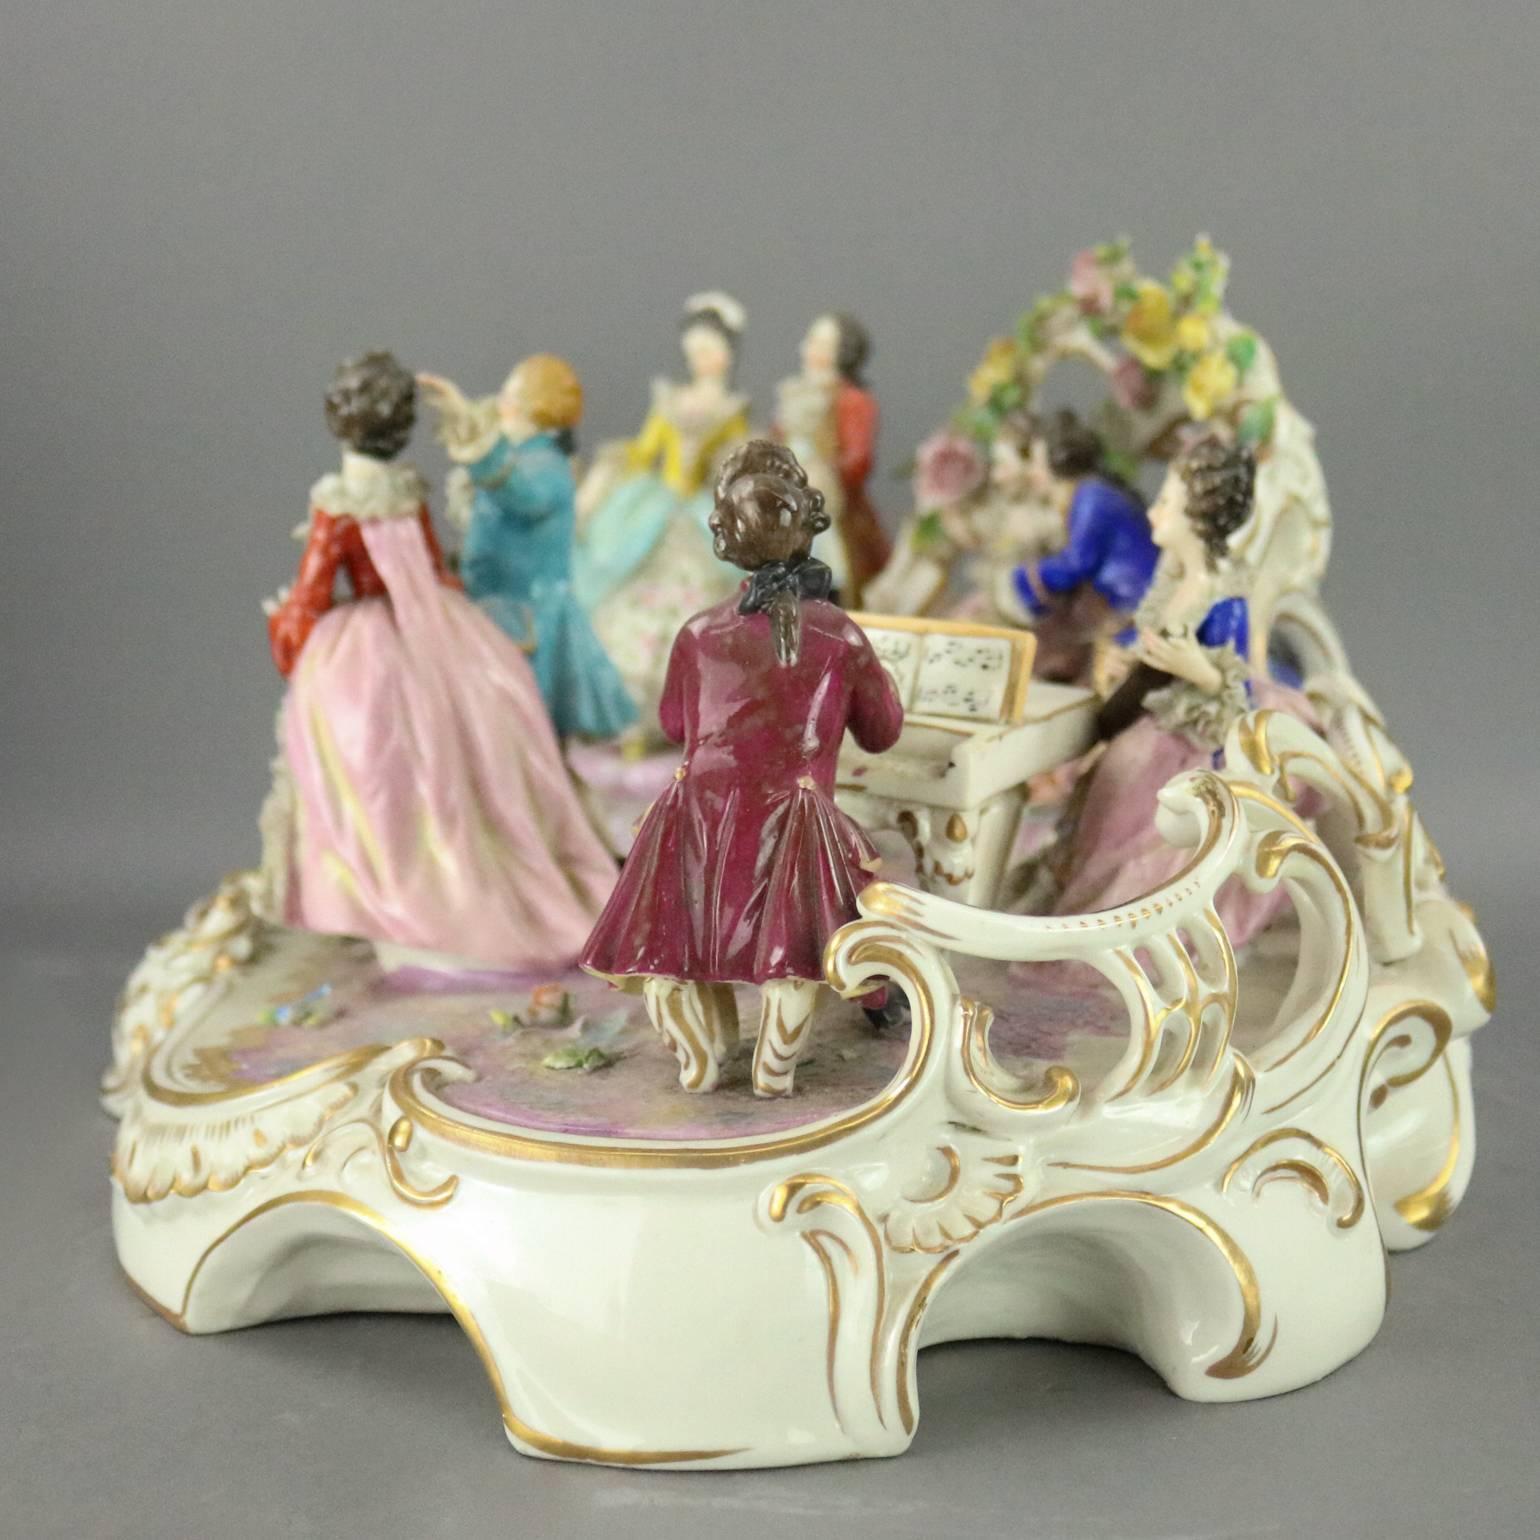 Antique German Dresden figural group features hand-painted and gilt grouping of ballroom scene with dancing figures and others playing musical instruments including mandolin and spinet piano, pierced backdrop, gilt scroll and foliate decoration